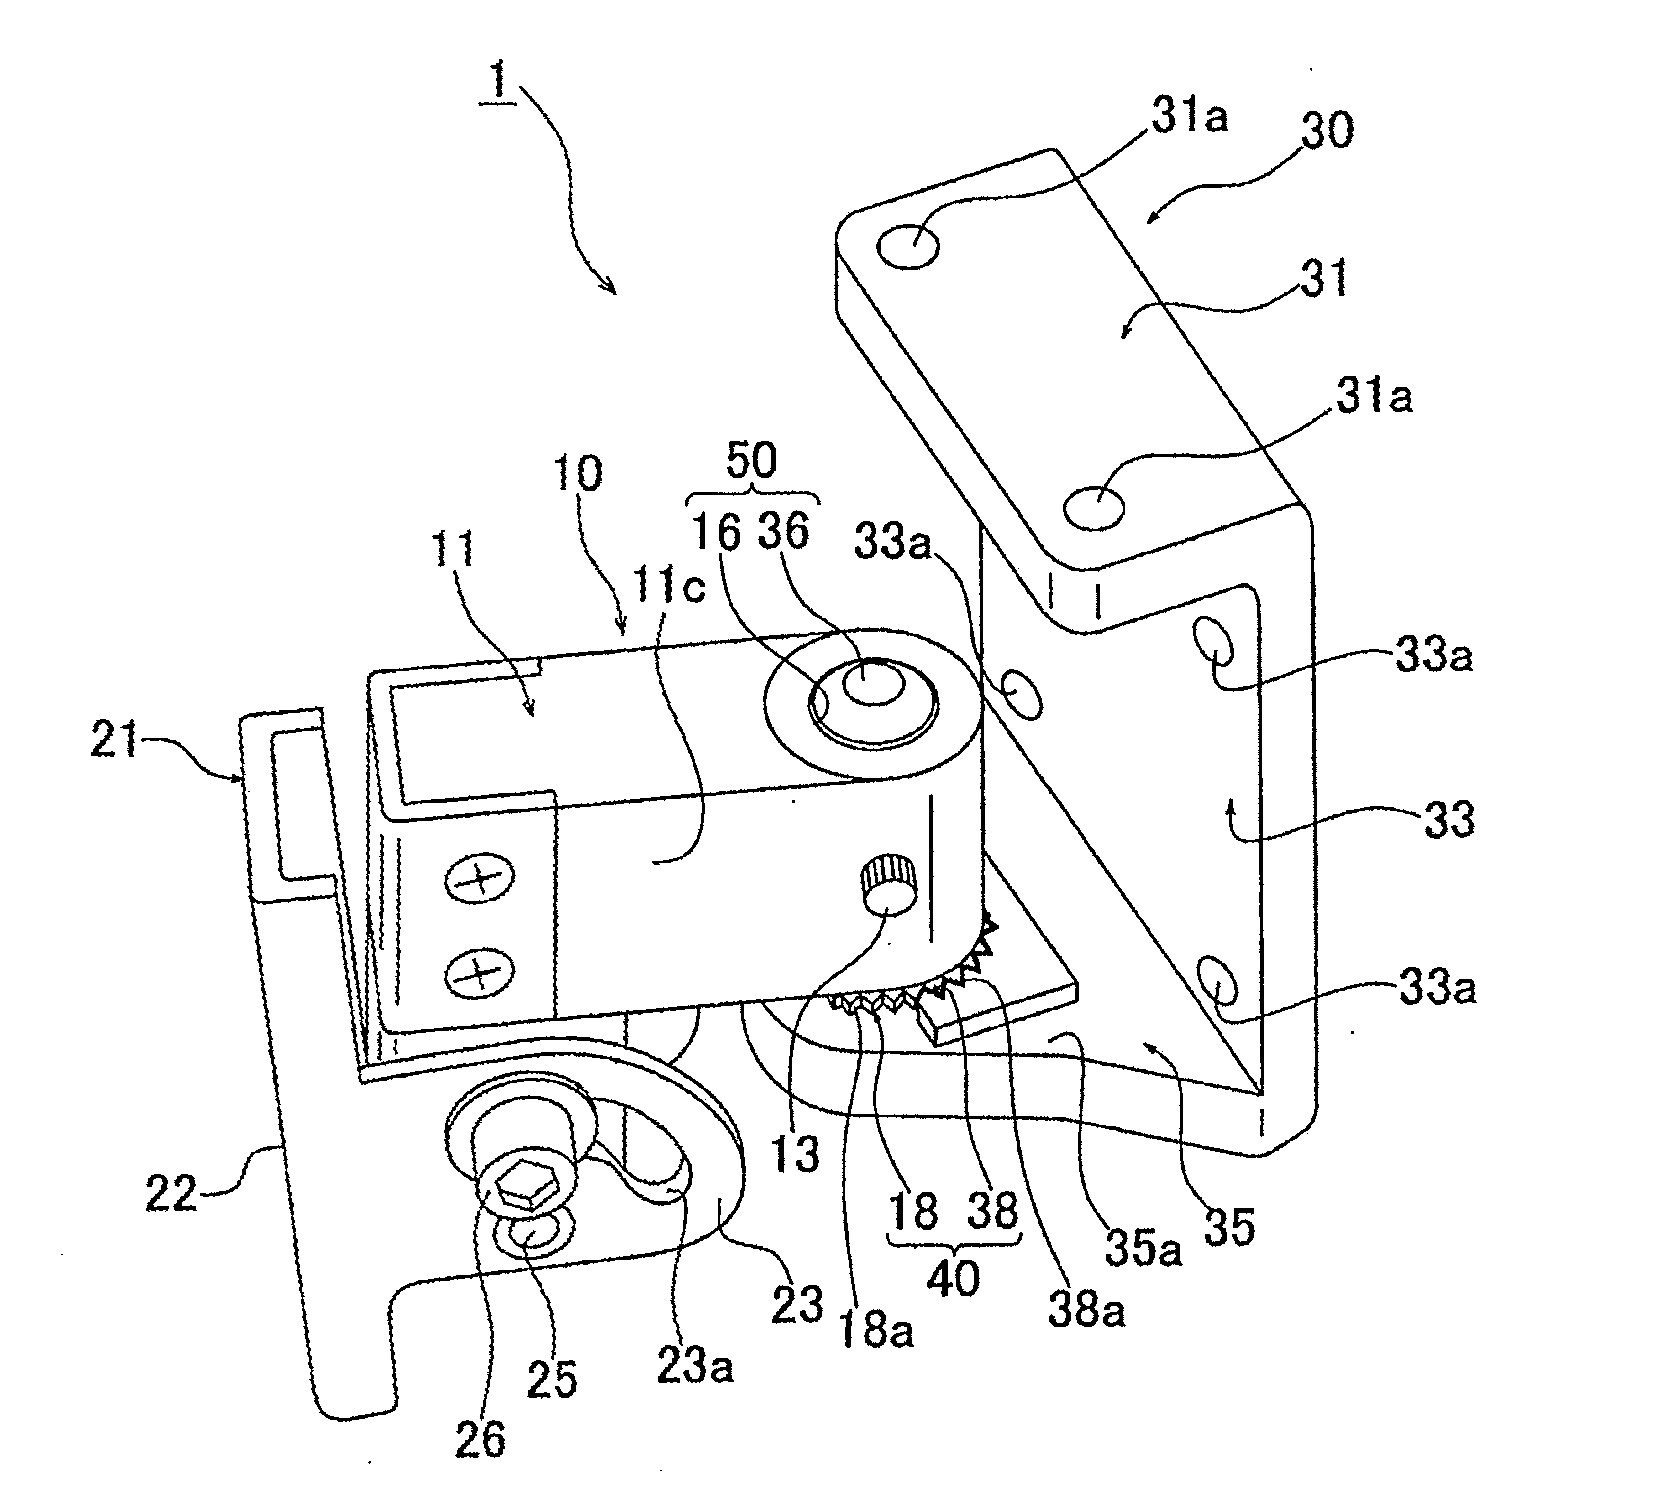 Device mounting apparatus